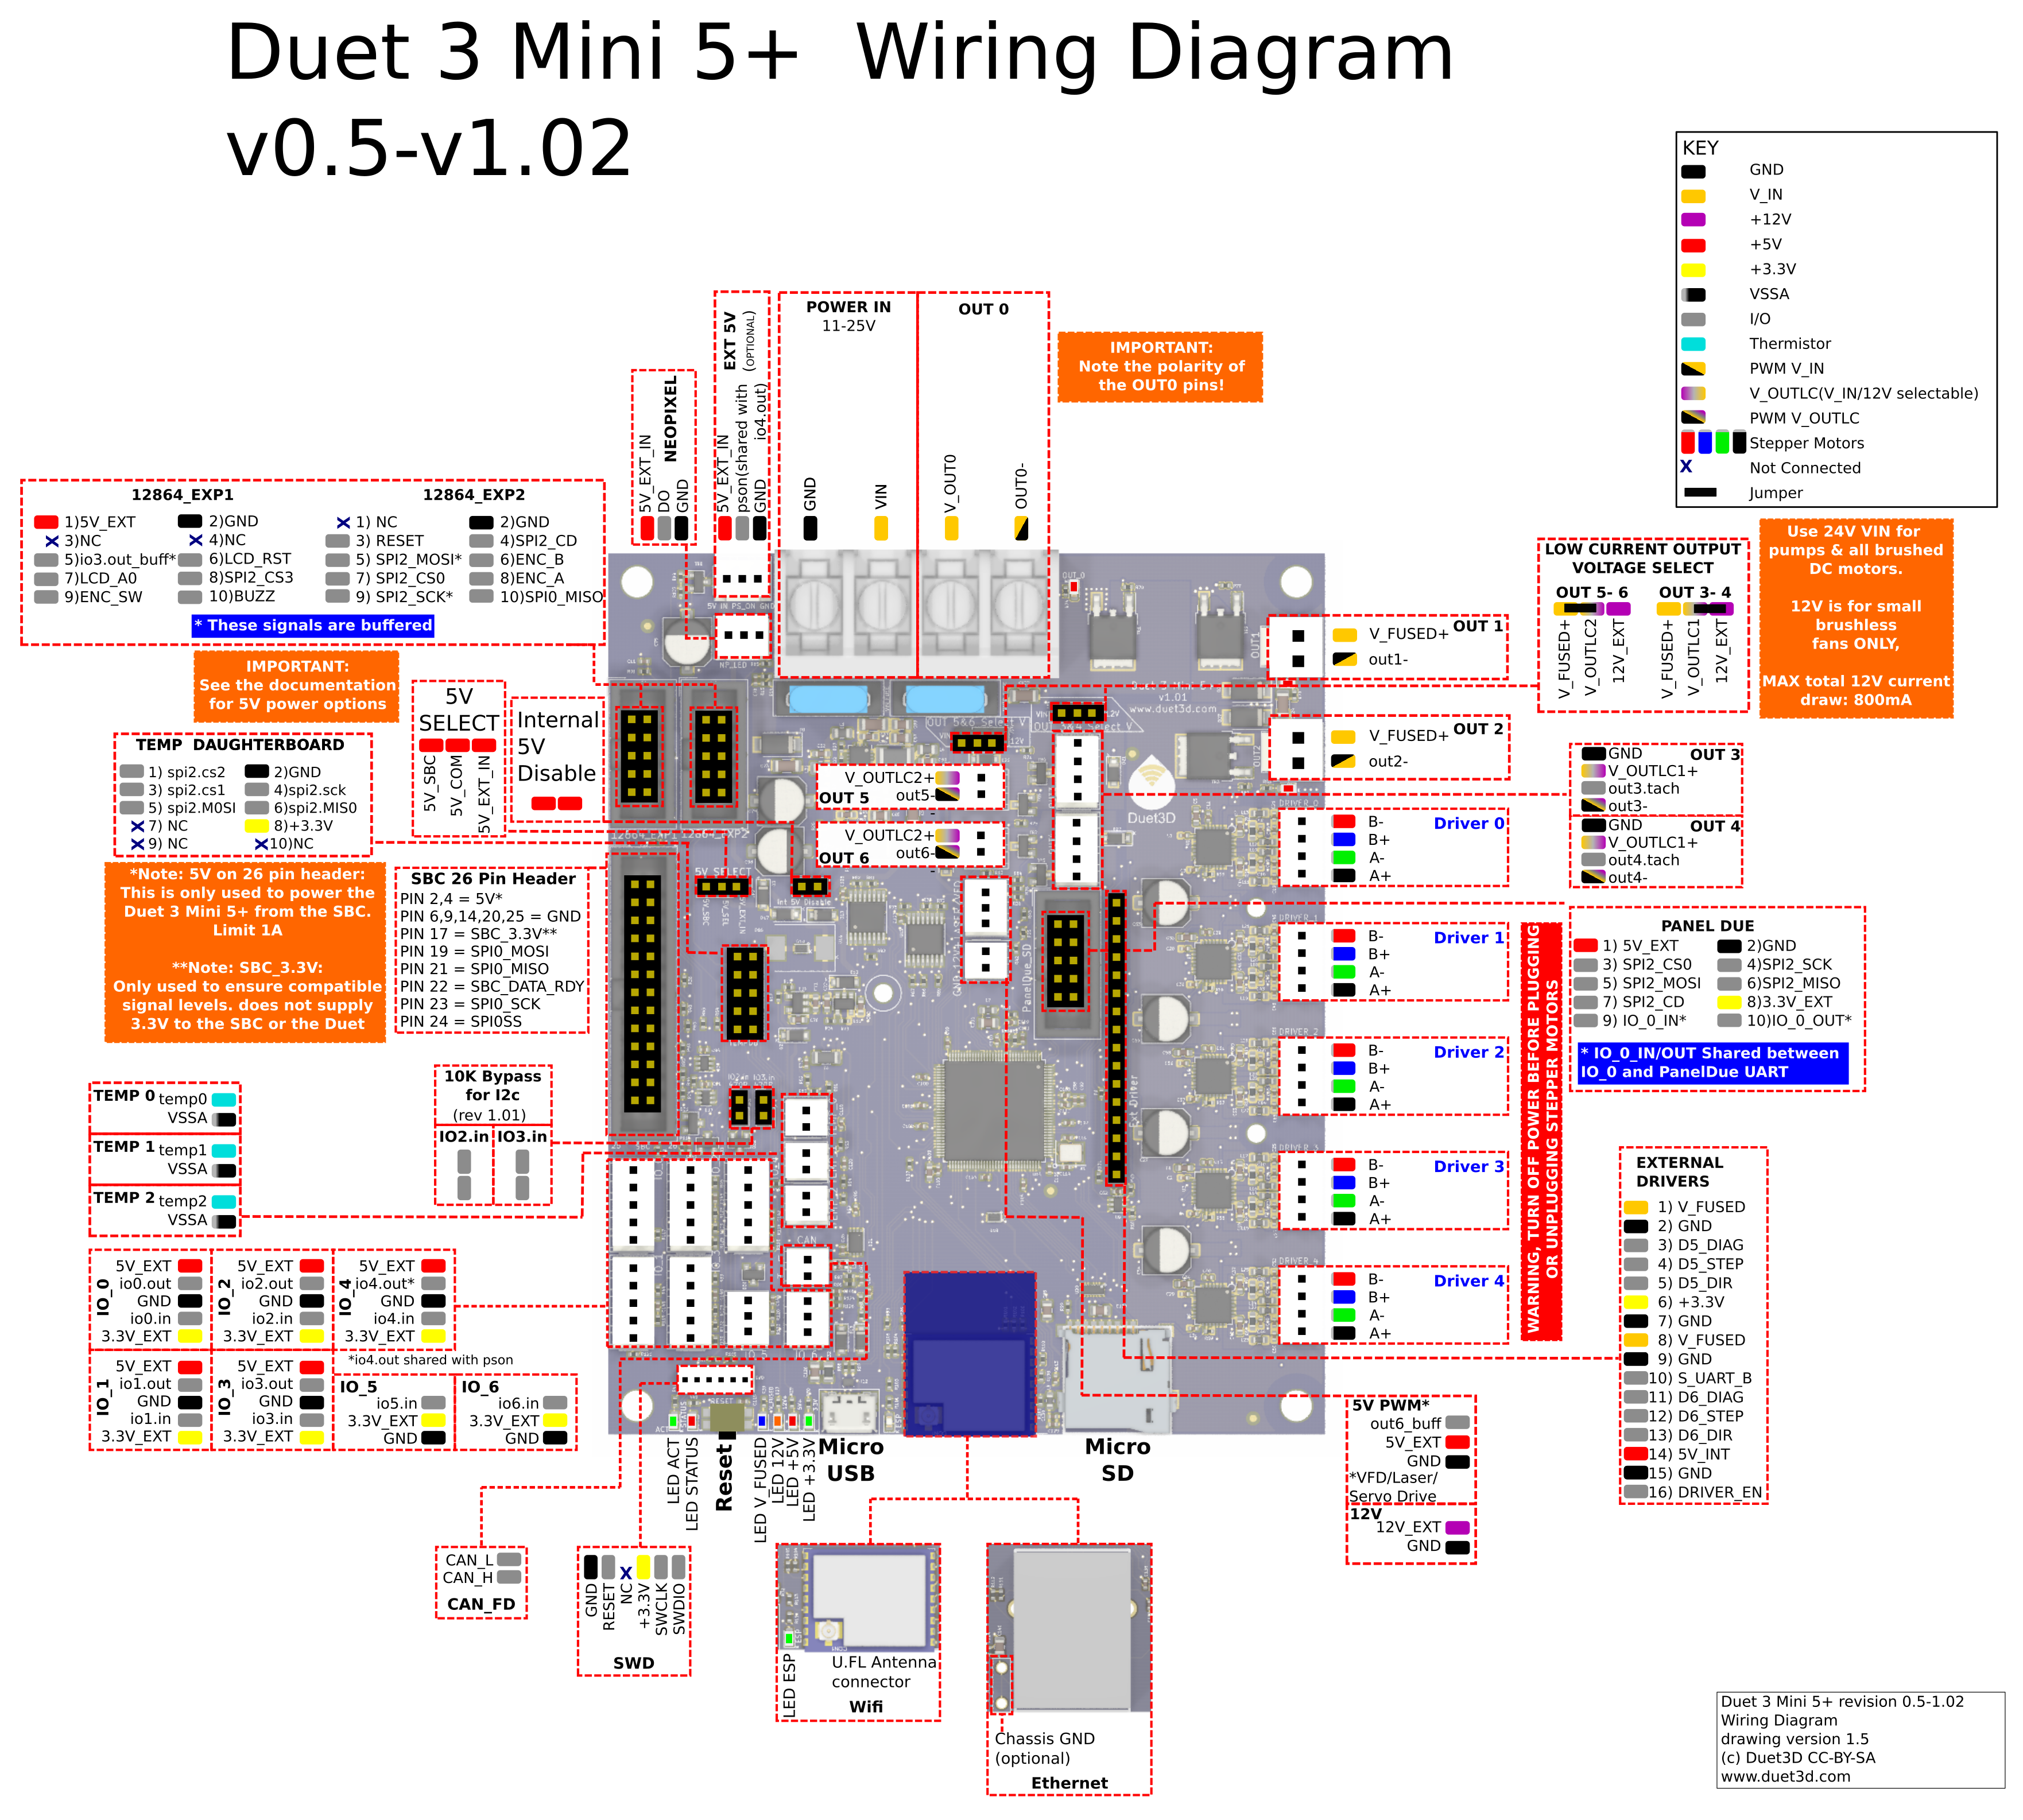 duet_3_mini_5+_wiring_latest.png